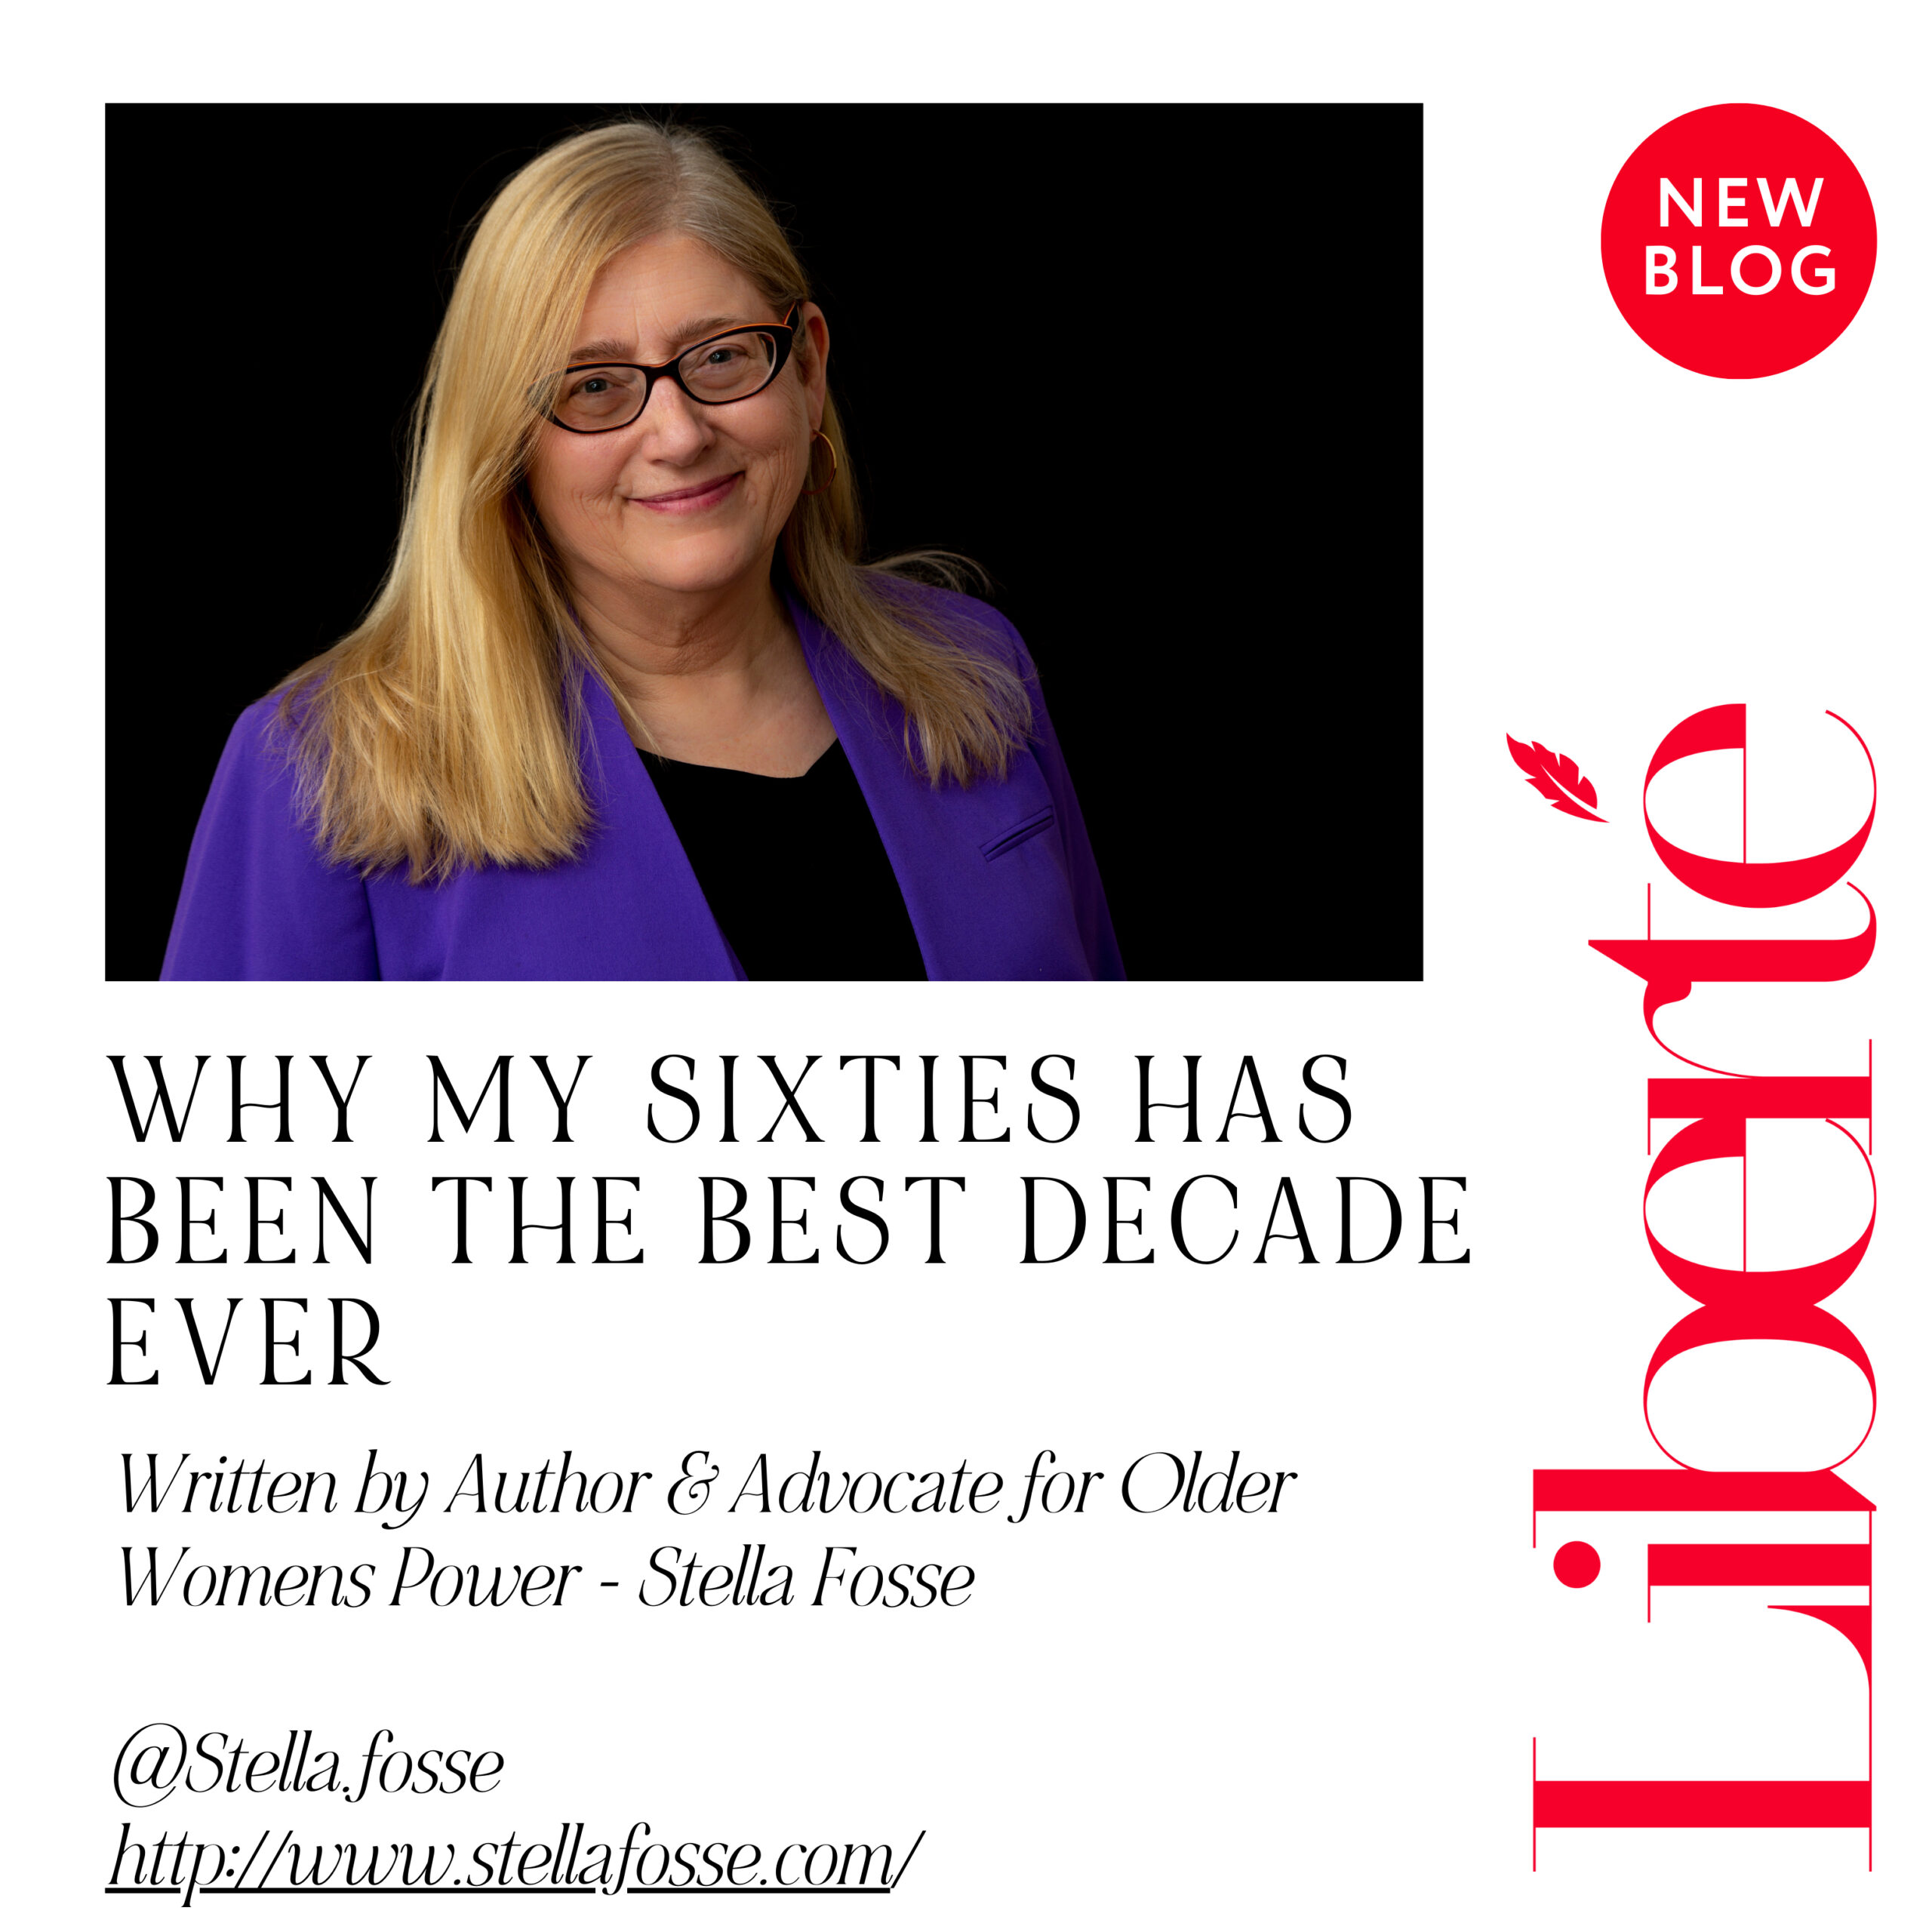 Why my sixties have been my best decade ever by Stella Fosse